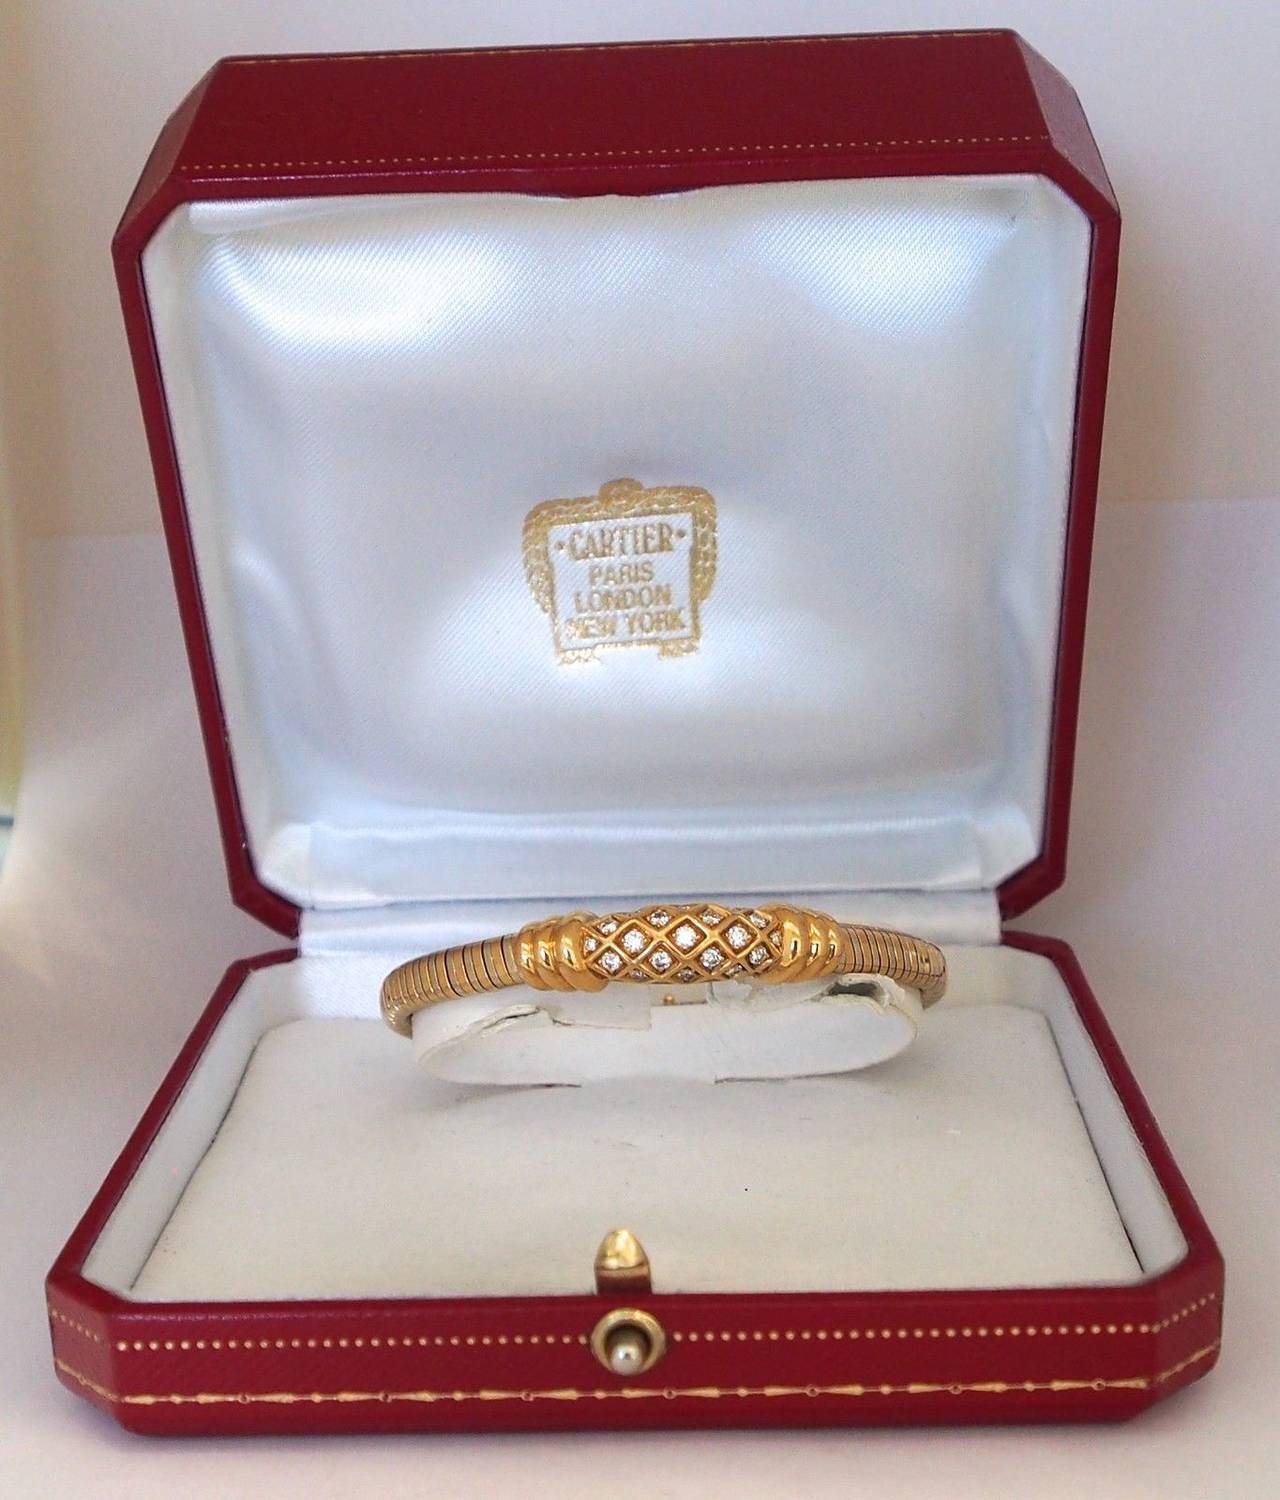 Brand Name  Cartier  
Series  Alexandria  
Gender  Lady's  
Case Material  18k Yellow Gold & White Gold  
Size 7 inches  
Carat Weight .70cts - 27 Diamonds